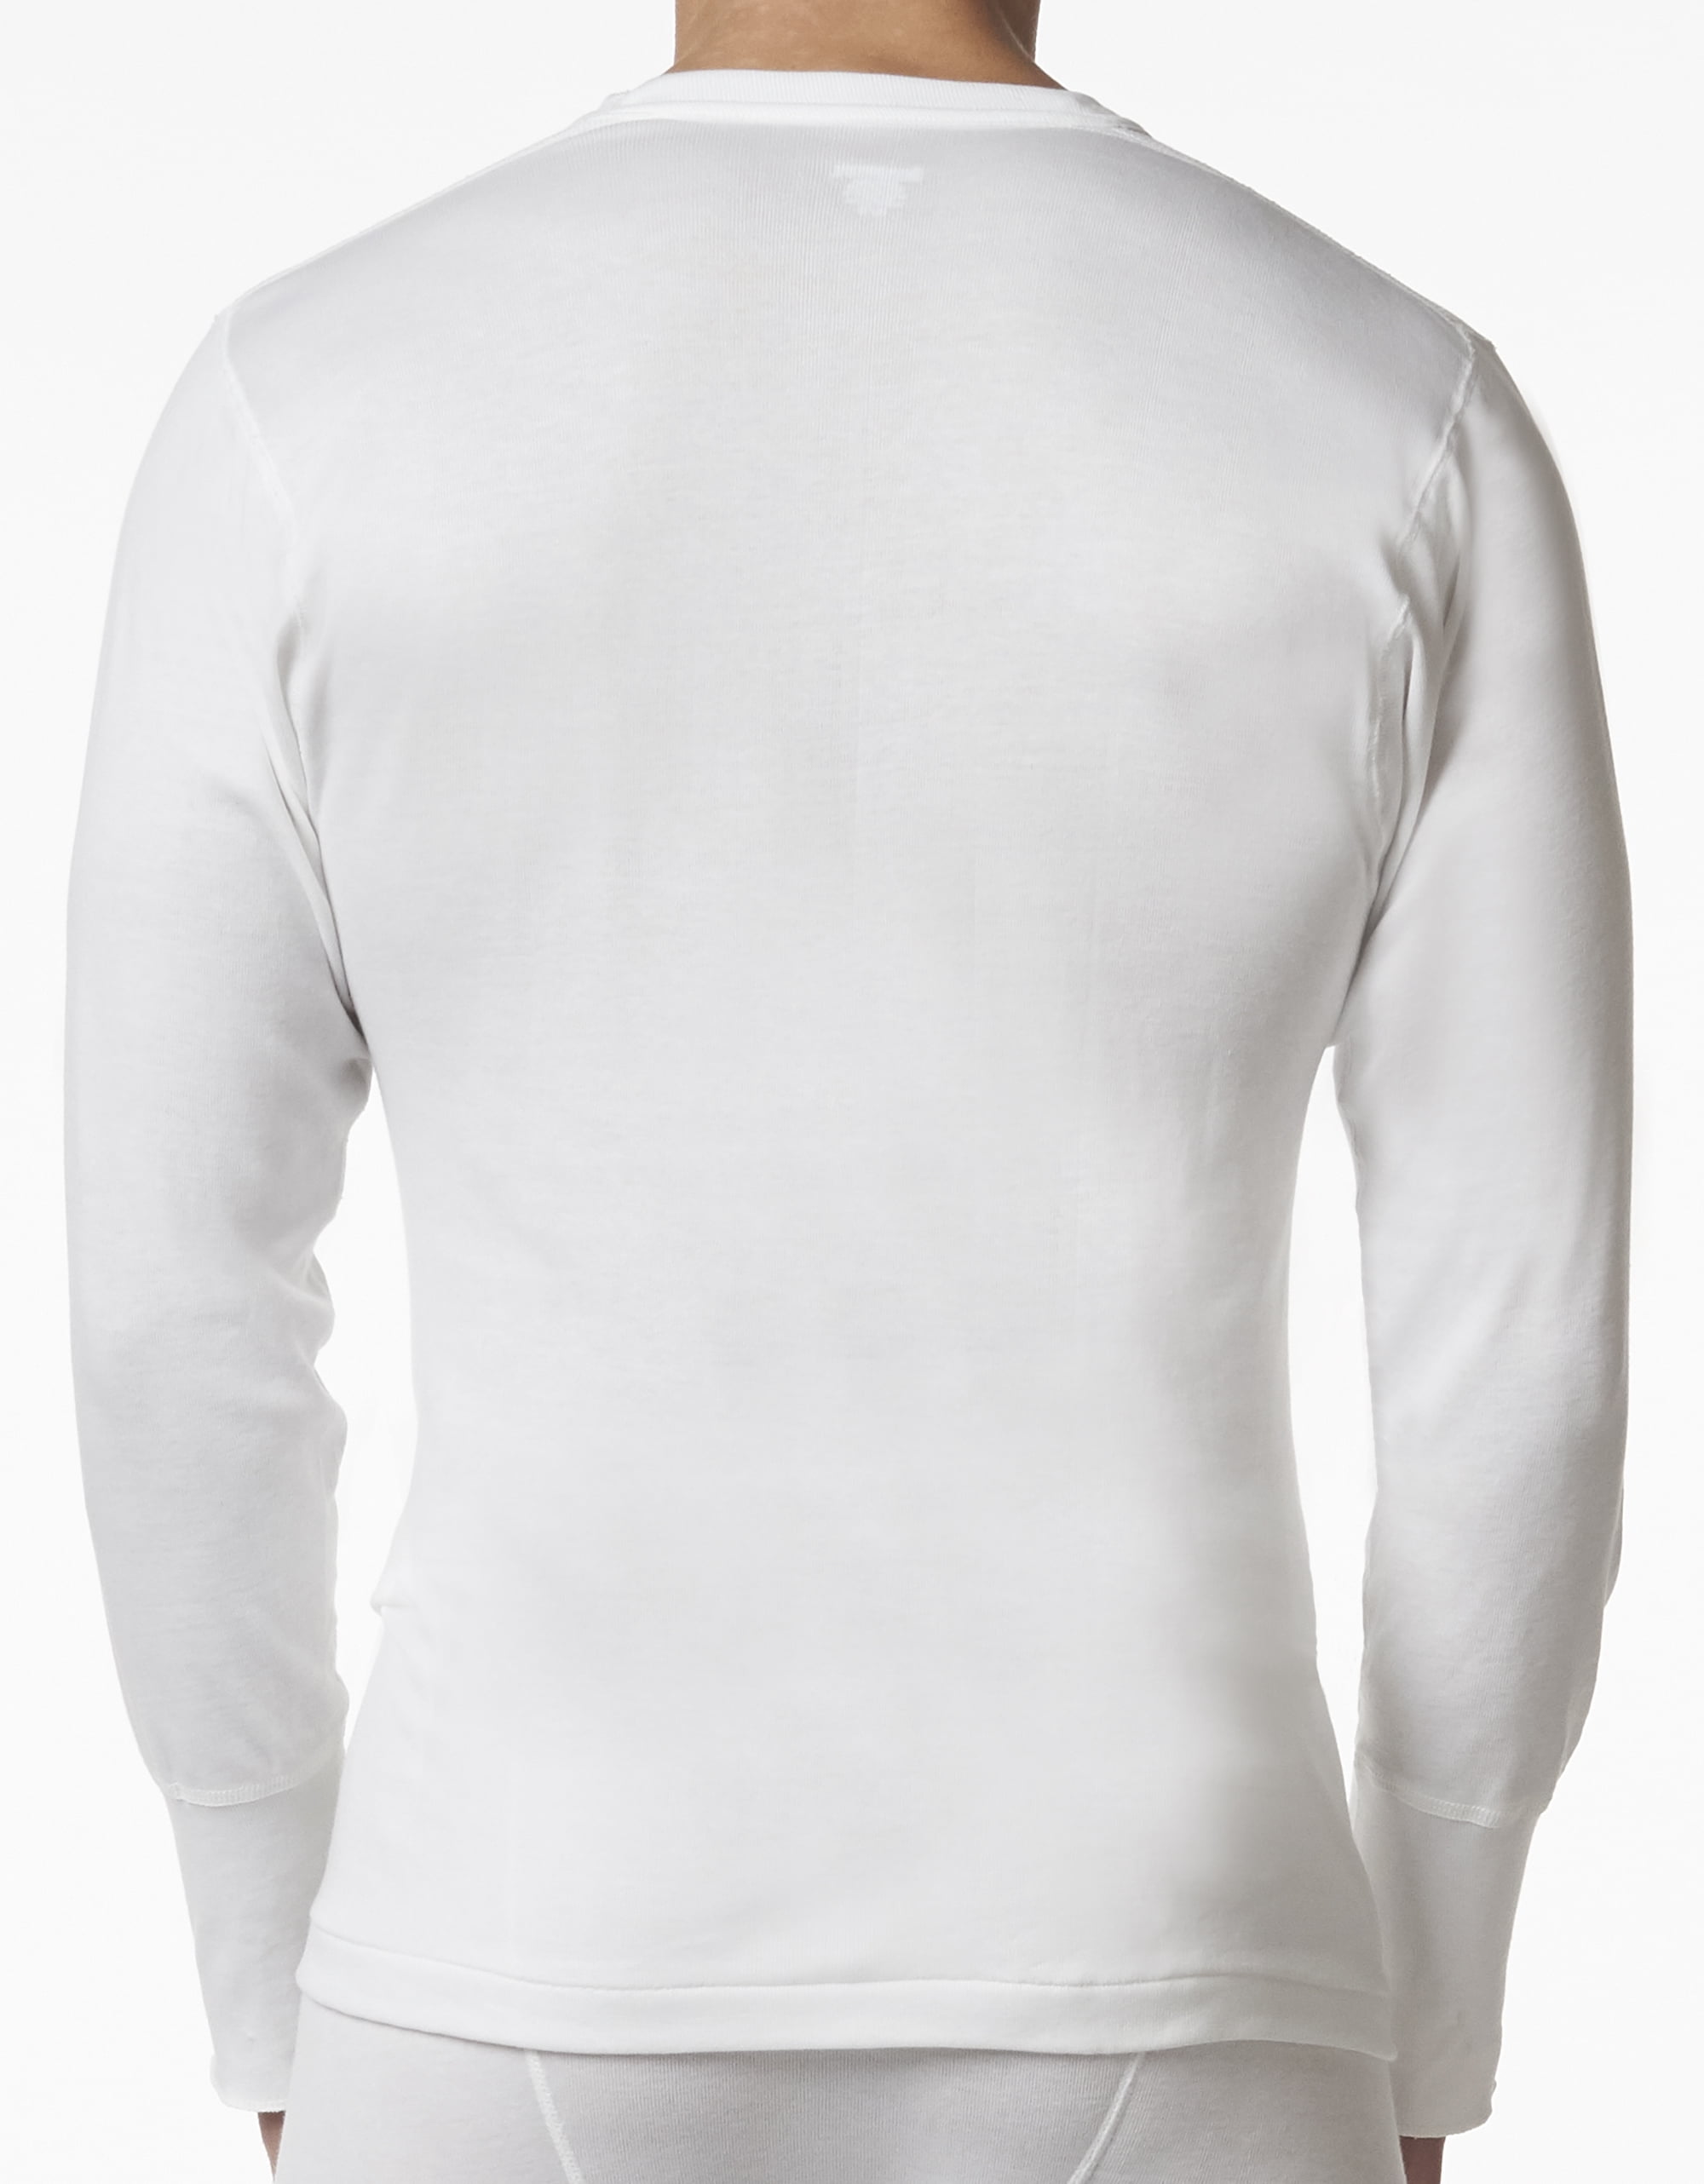 Stanfield's Adult Mens Premium Cotton Rib Long Sleeve Thermal Top, Sizes,  S-3XL 